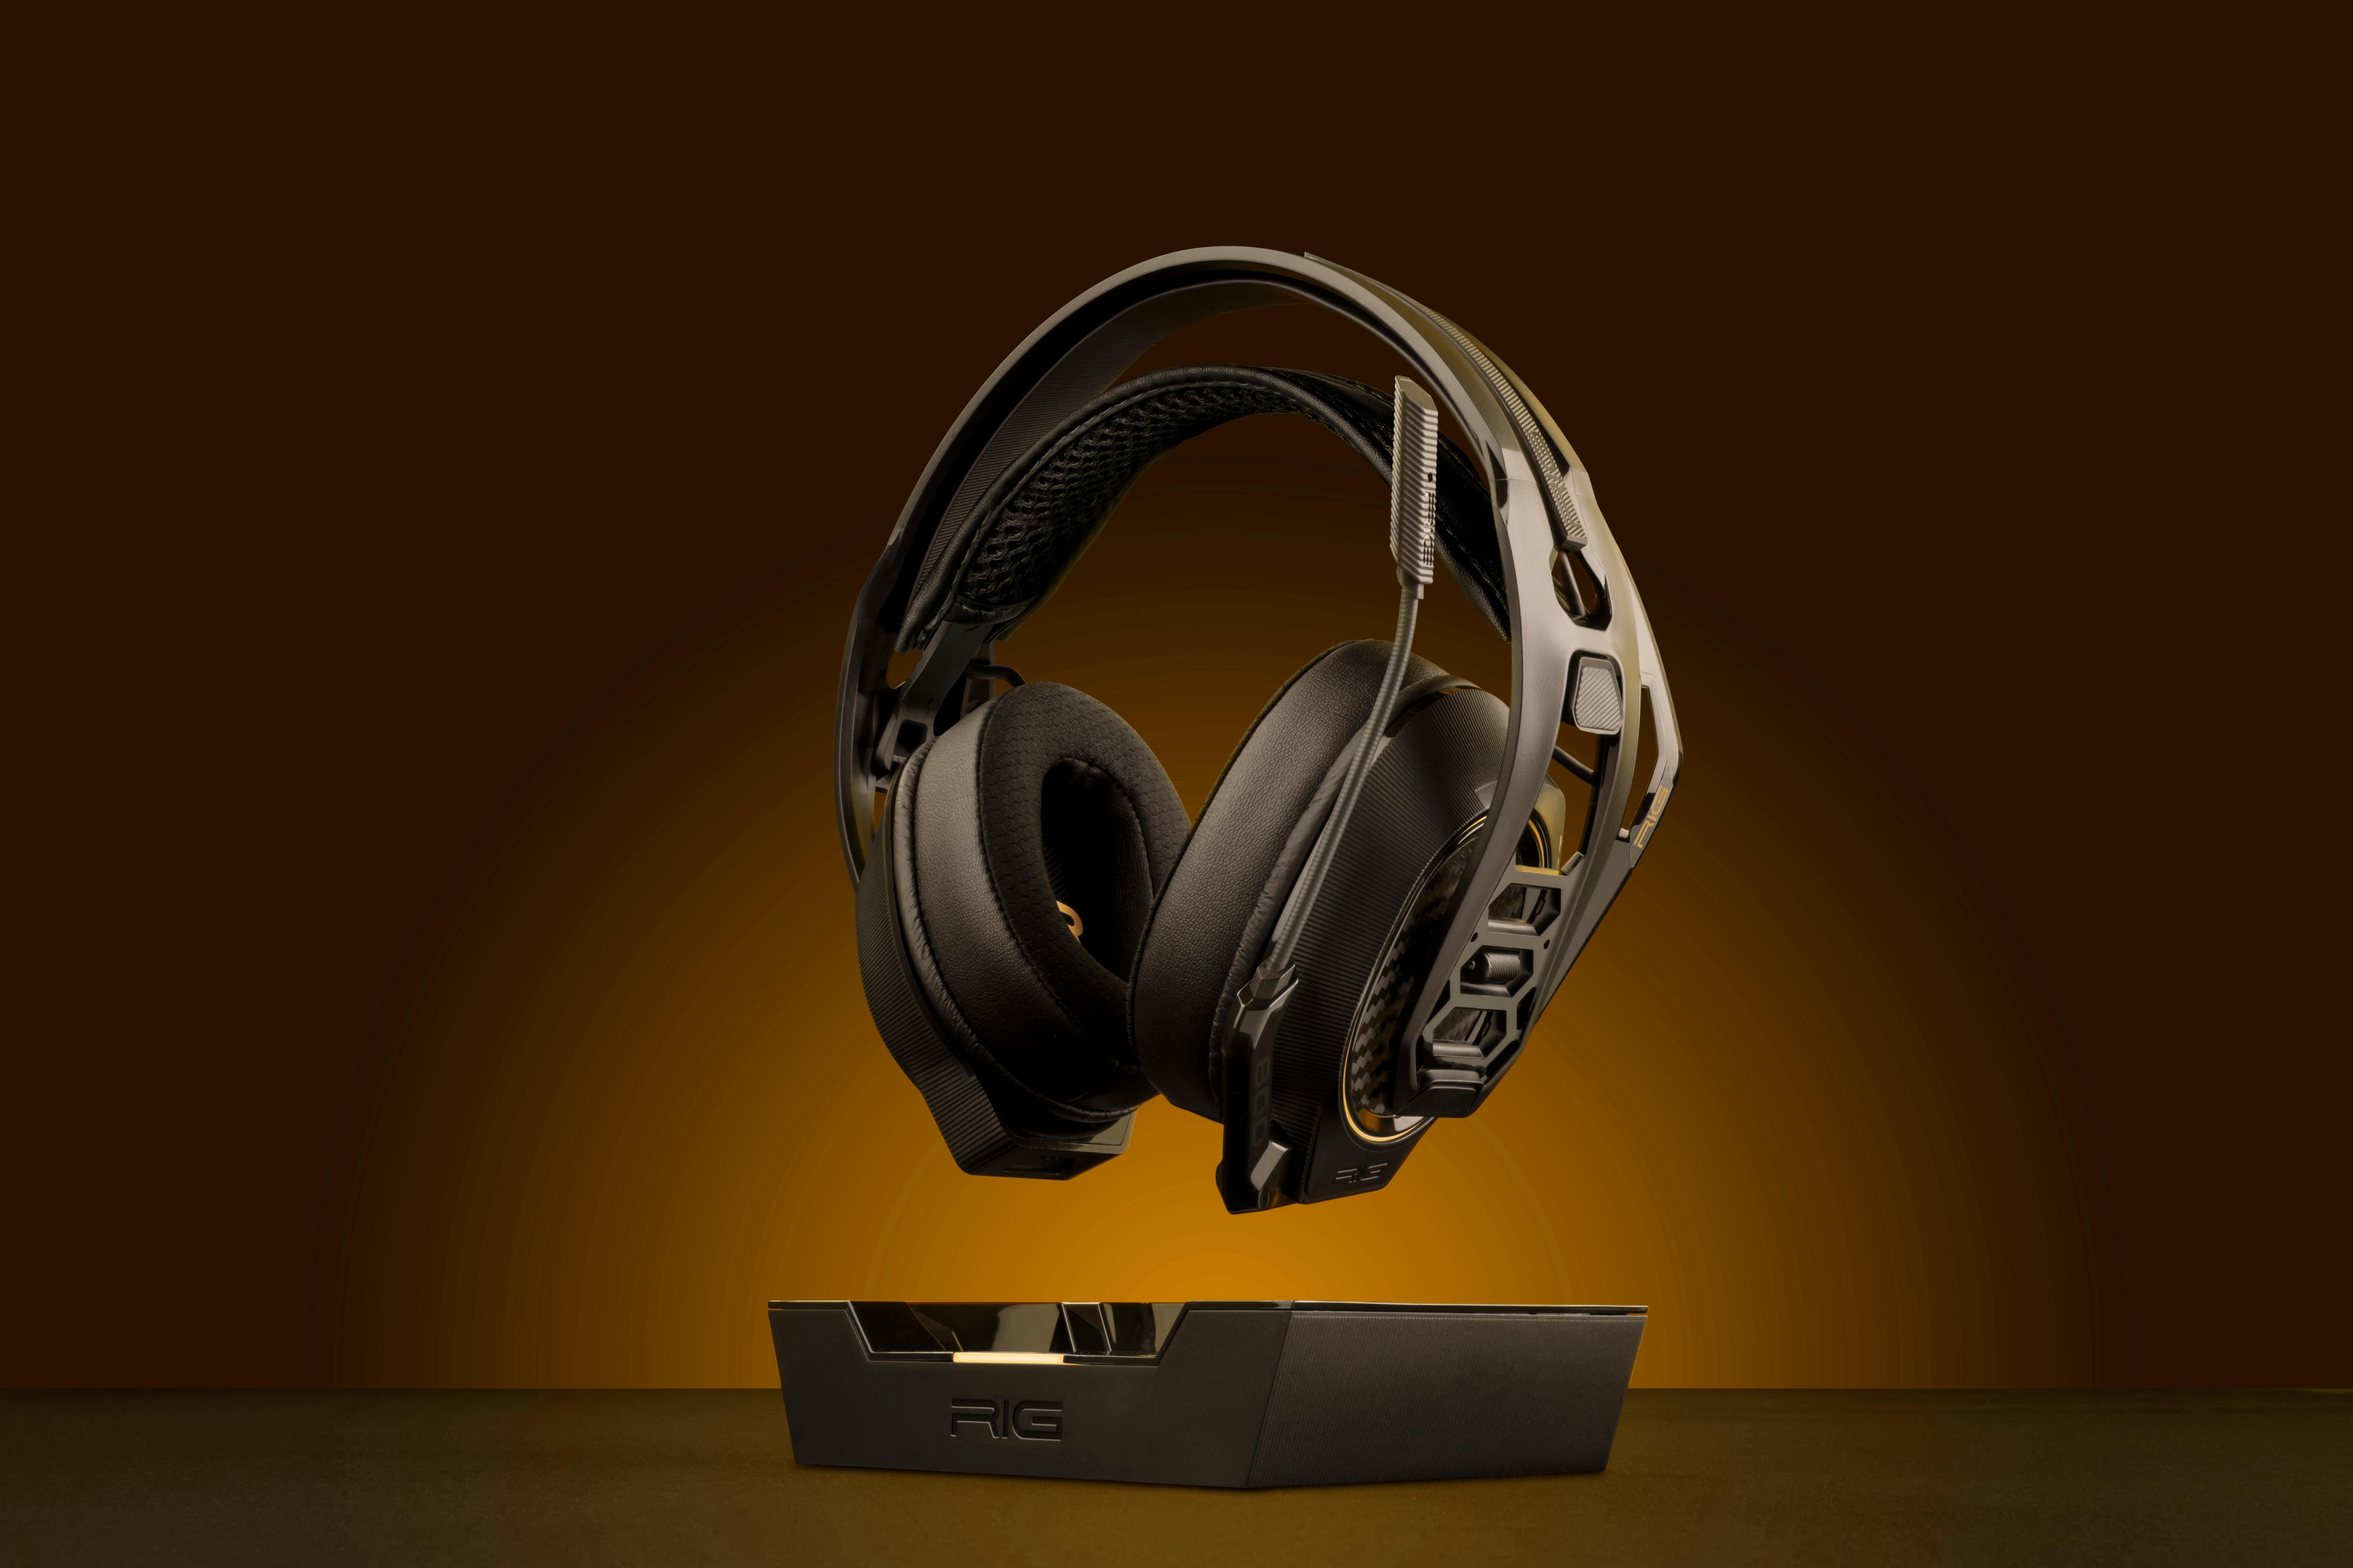 RIG PRO 800 HD gaming headset